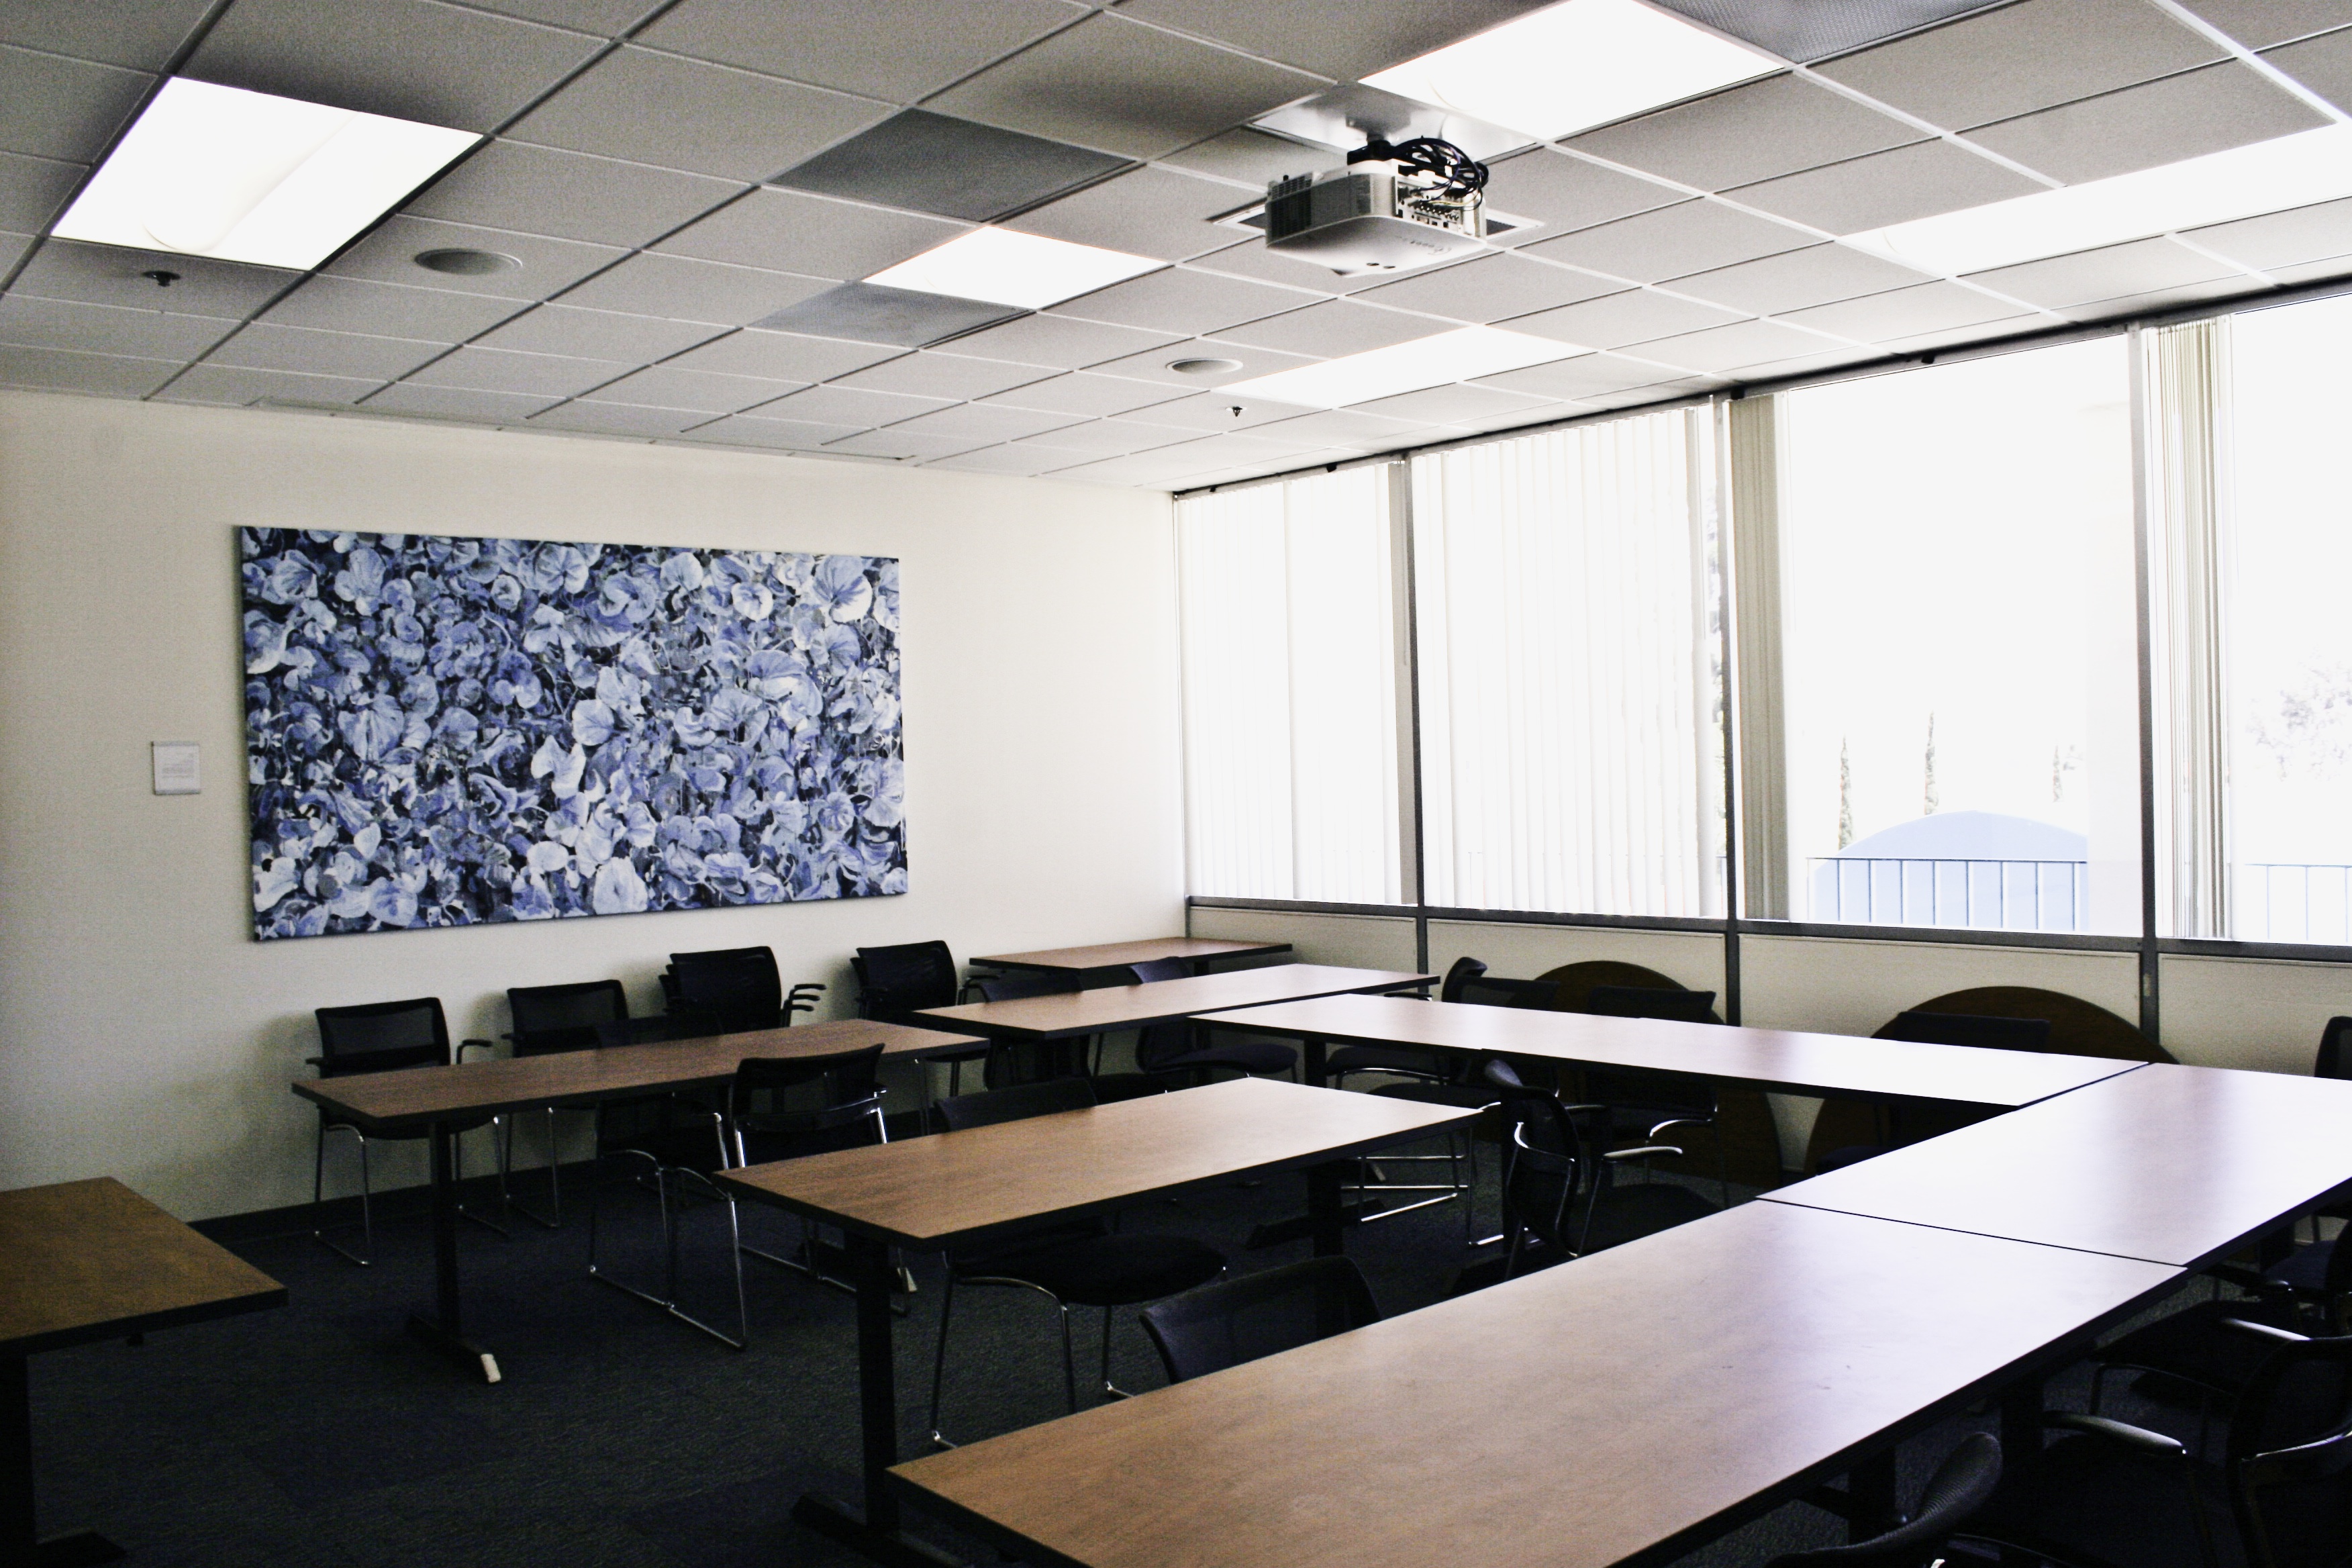 Blue Leaves by Jessica Siemens in San Diego State University Aztec Conference Room